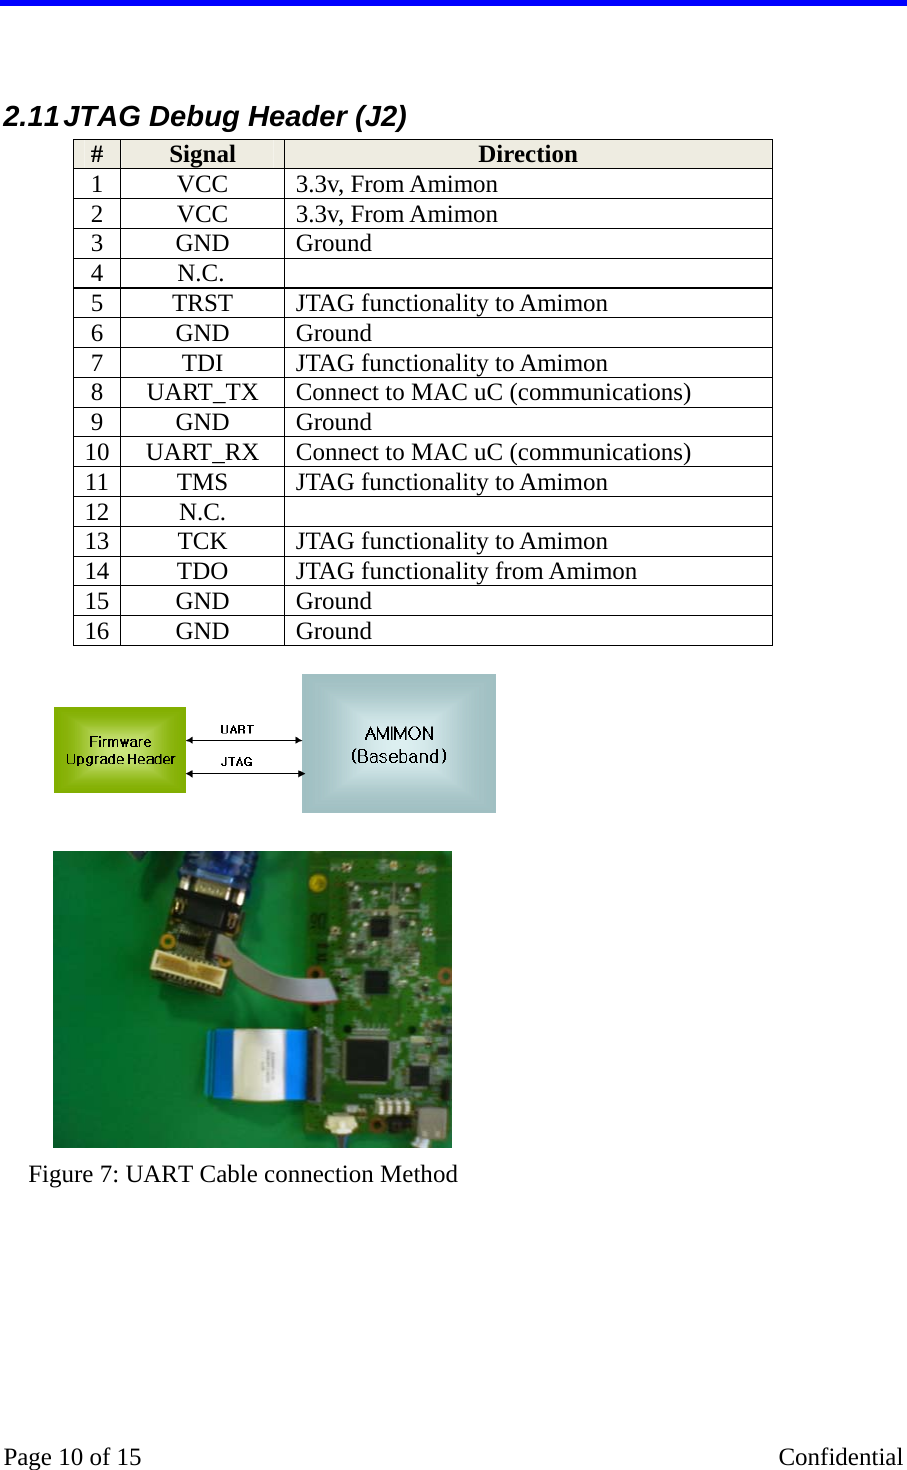    Page 10 of 15    Confidential  2.11 JTAG Debug Header (J2) #  Signal  Direction 1 VCC 3.3v, From Amimon 2 VCC 3.3v, From Amimon 3 GND Ground 4   N.C.   5  TRST  JTAG functionality to Amimon 6 GND Ground 7  TDI  JTAG functionality to Amimon 8  UART_TX  Connect to MAC uC (communications) 9 GND Ground 10  UART_RX  Connect to MAC uC (communications) 11  TMS  JTAG functionality to Amimon 12 N.C.  13  TCK  JTAG functionality to Amimon 14 TDO JTAG functionality from Amimon 15 GND Ground 16 GND Ground      Figure 7: UART Cable connection Method  